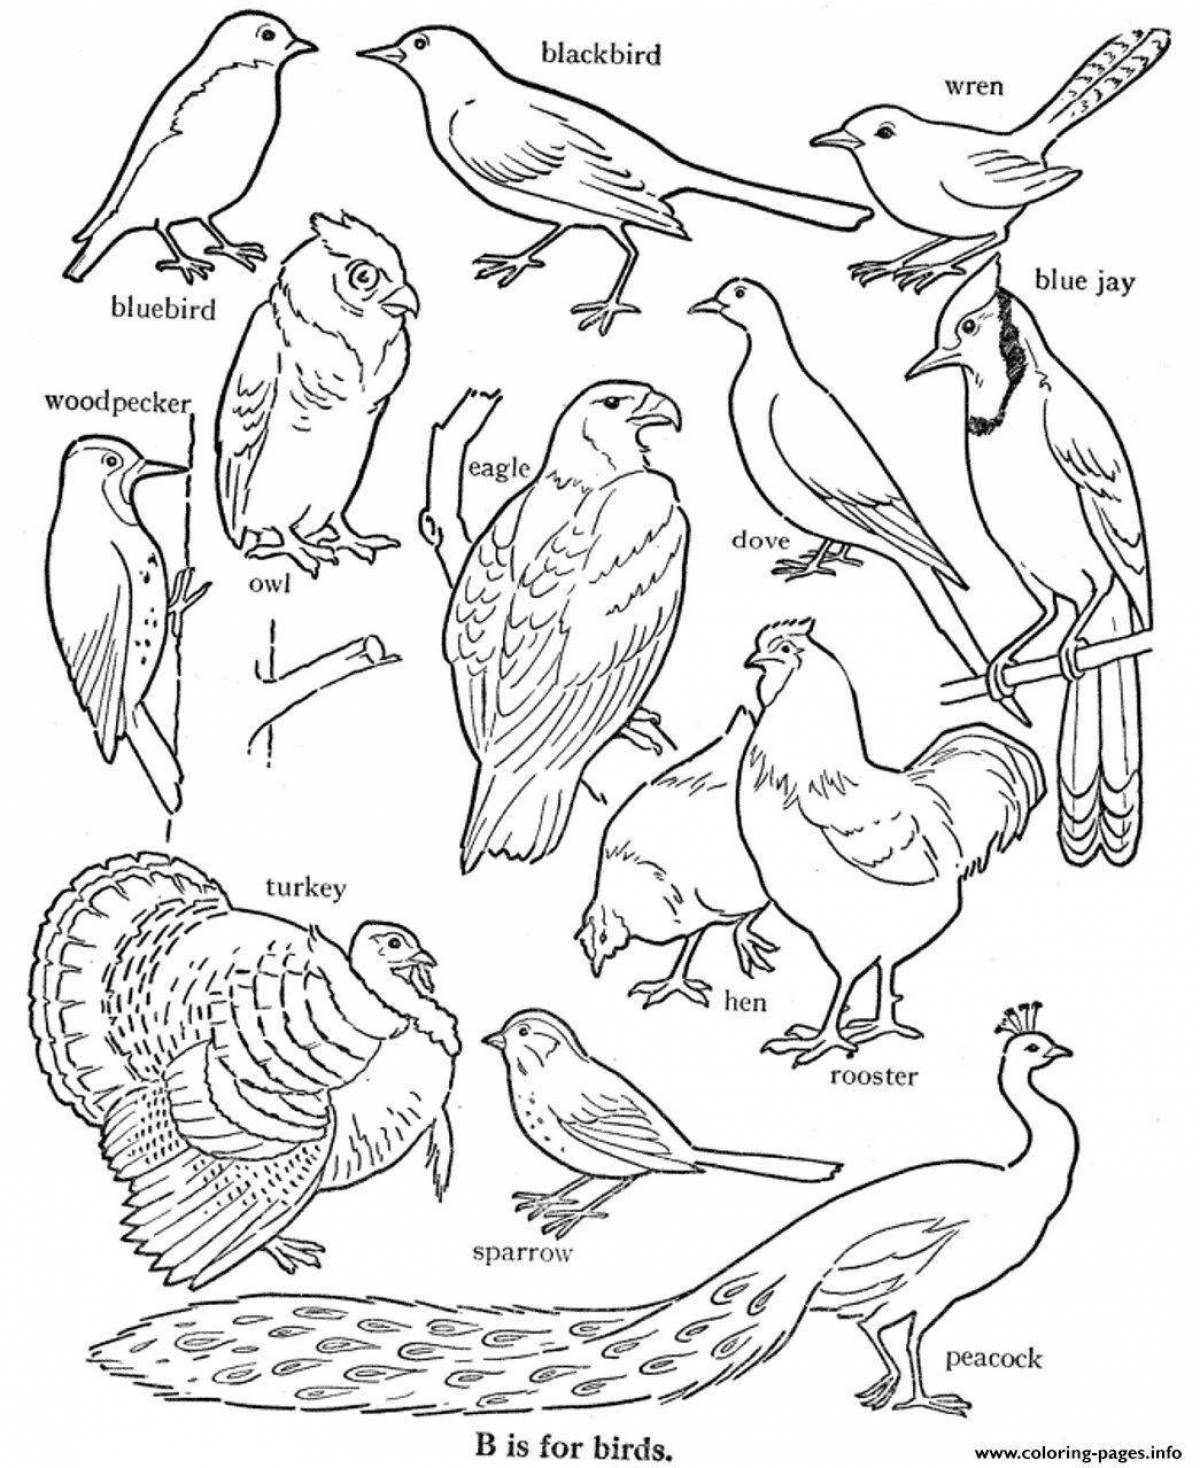 Coloring pages joyful migratory birds for children 6-7 years old